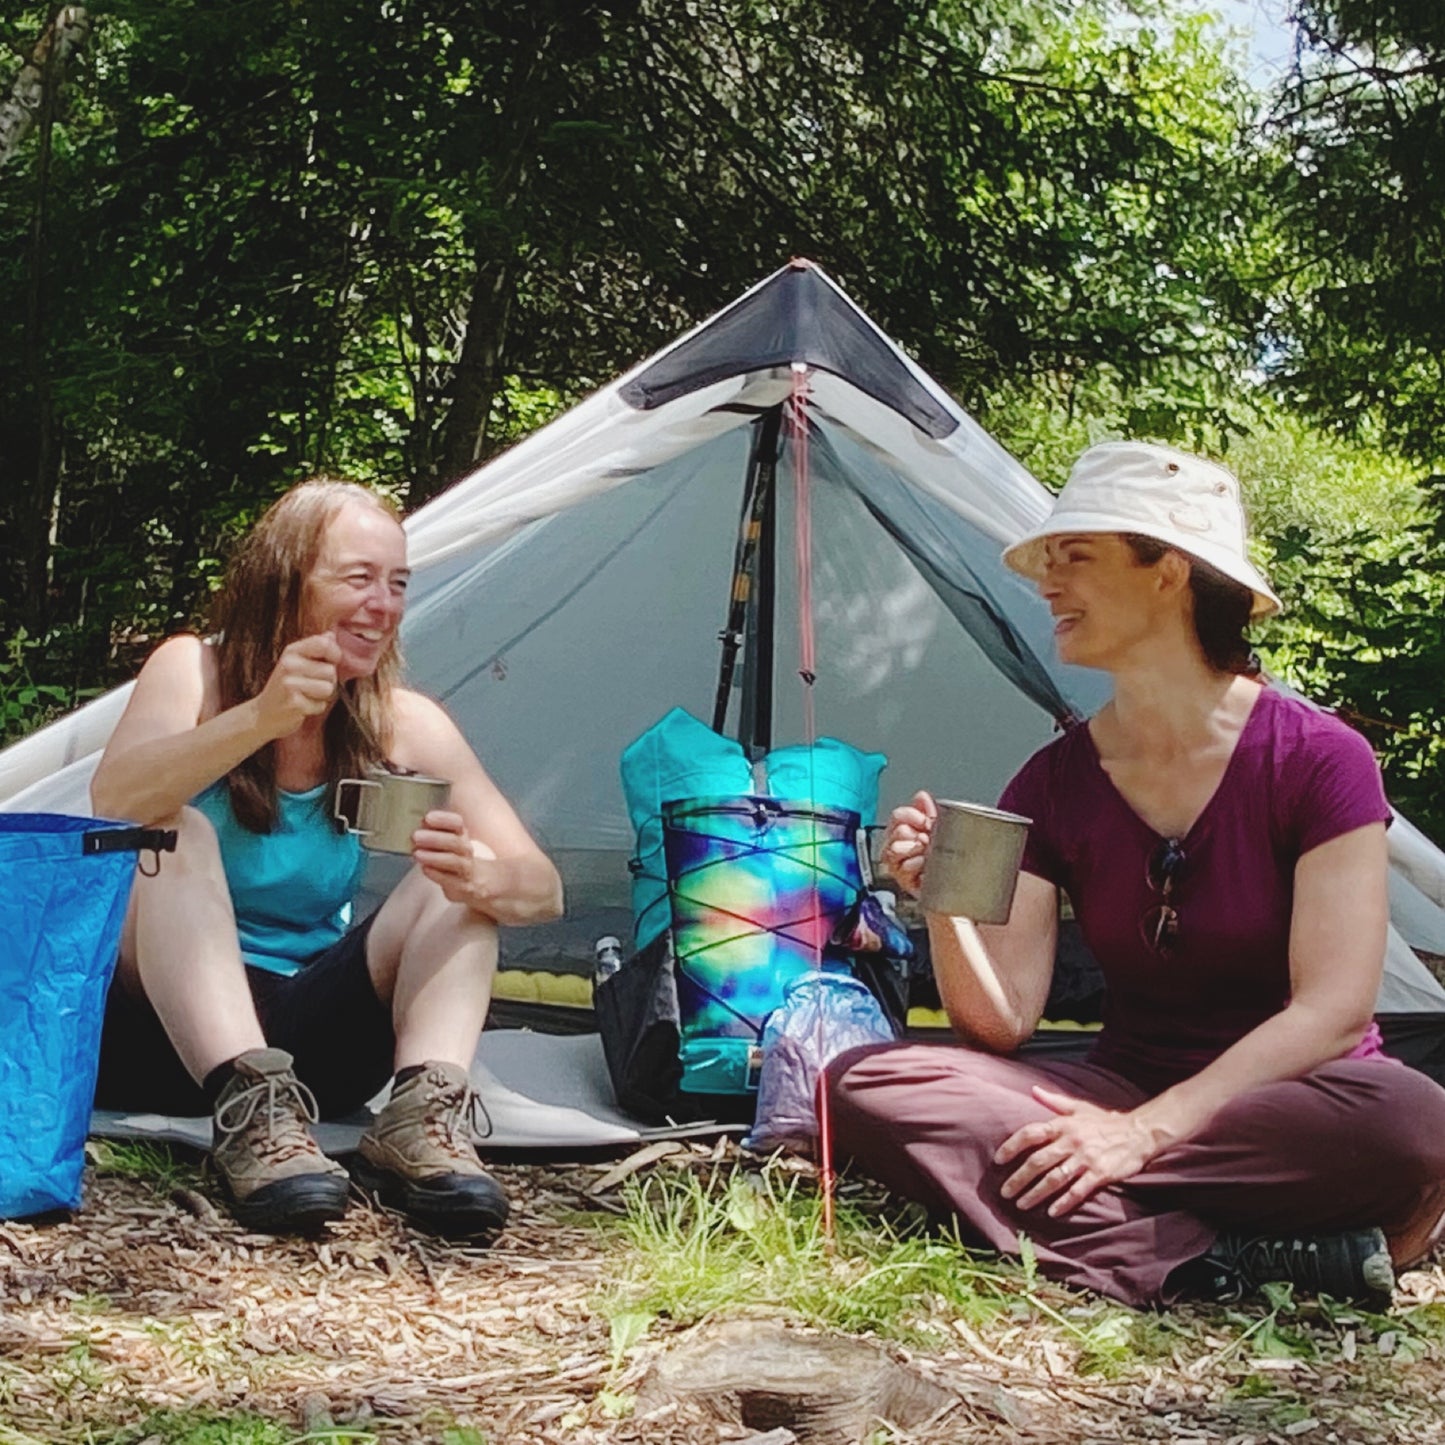 Two woman sitting in front of tent drinking/eating from titanium pots